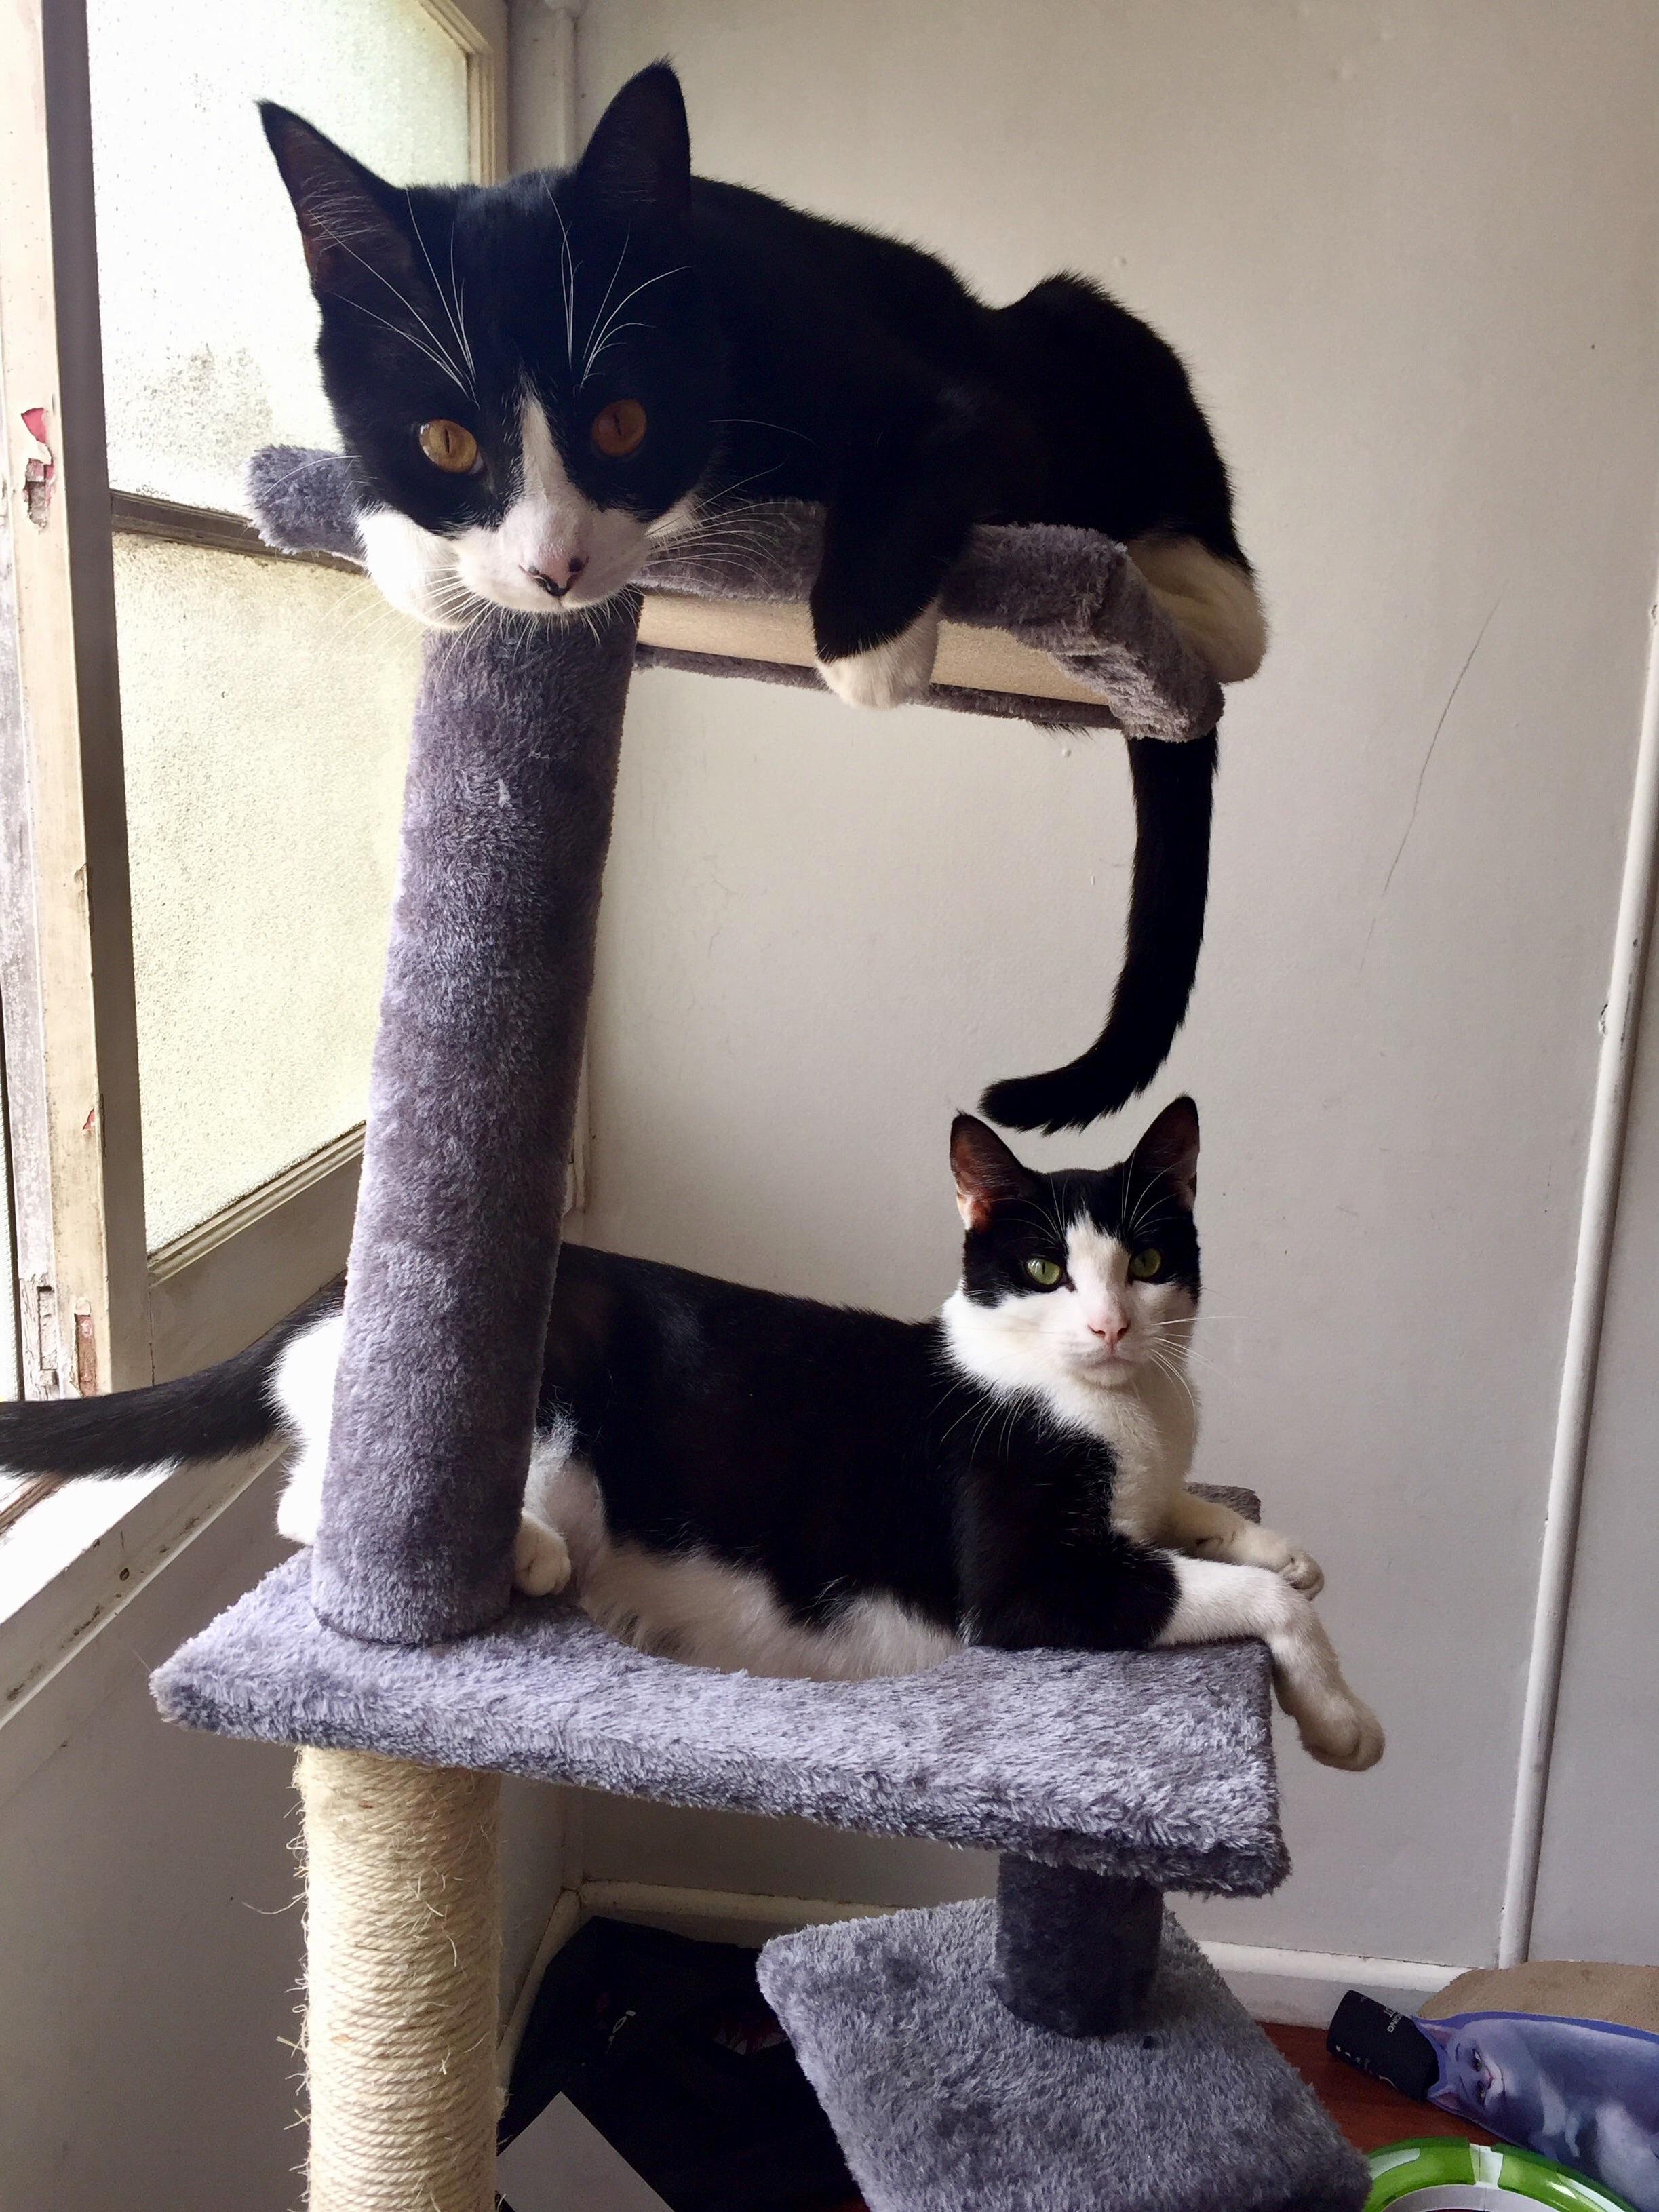 The leaning tower of tuxedo